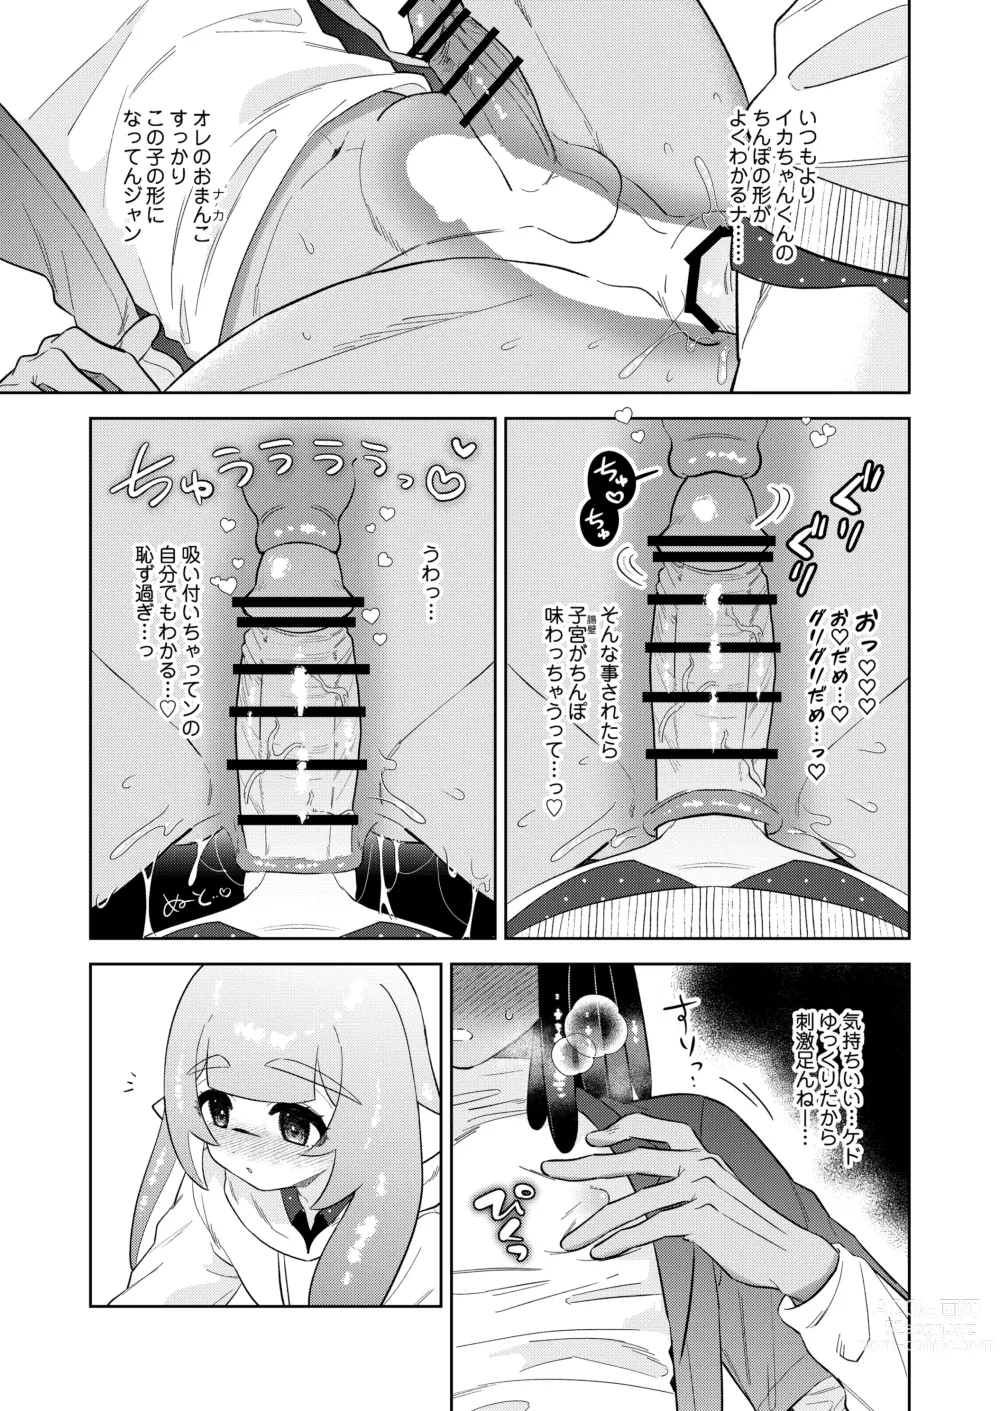 Page 24 of doujinshi Lovepotion Chocolate